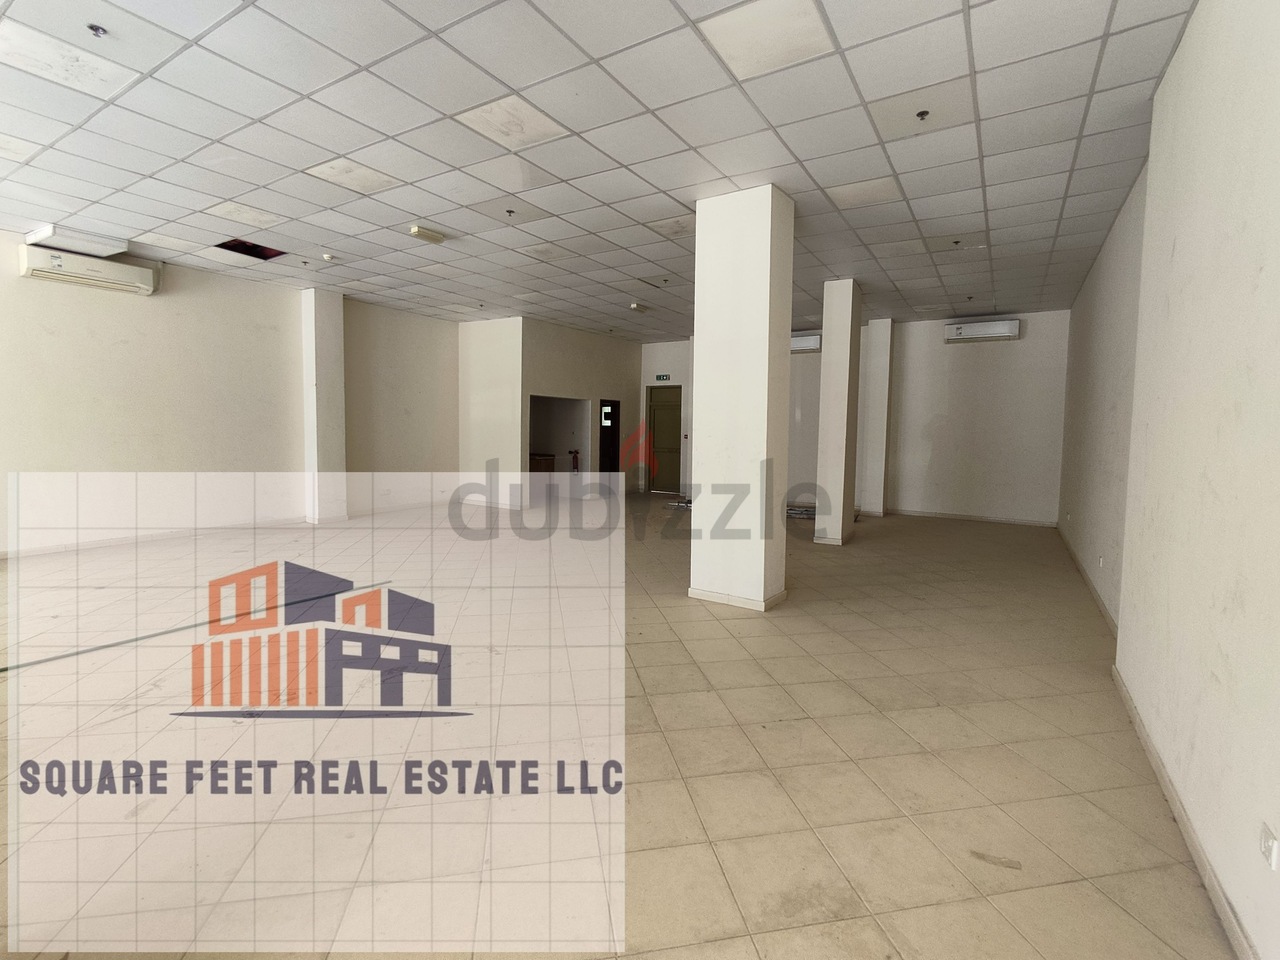 Main Road Facing Showroom For Urgent Lease !!